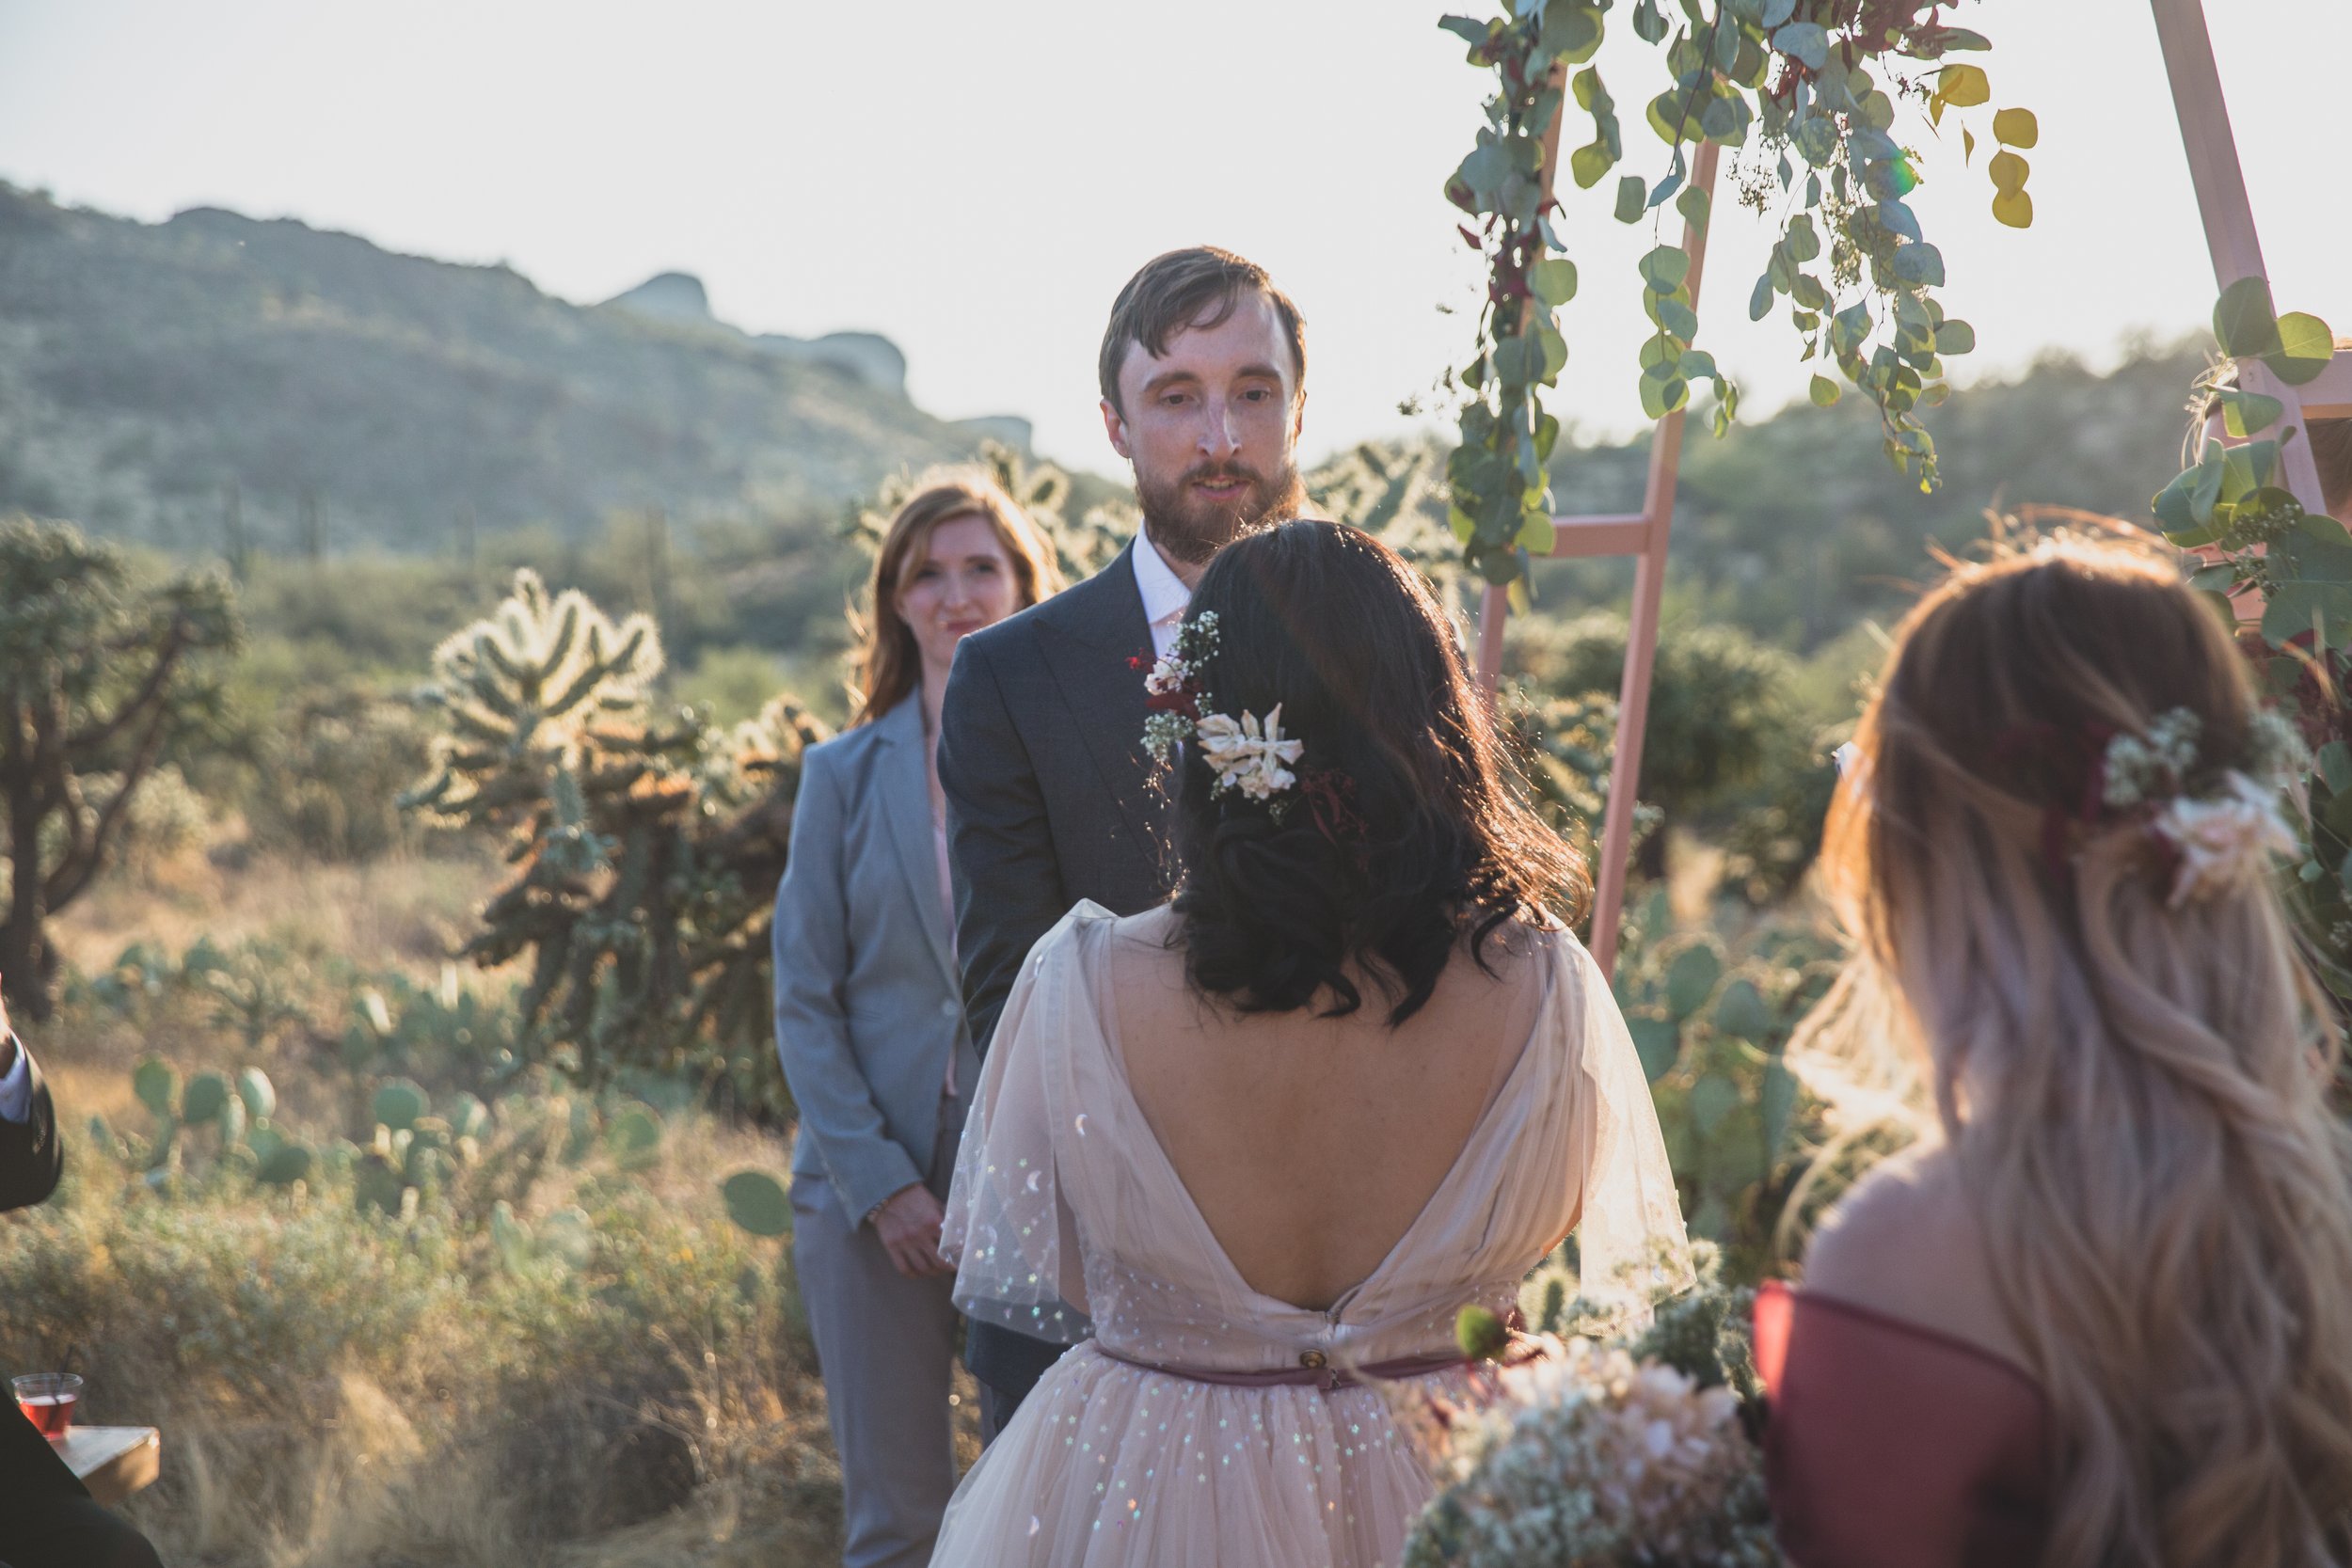 Bride and groom share their vows at their wedding ceremony at an intimate Superstition Mountain micro wedding in rural Arizona by destination wedding photographer, Jennifer Lind Schutsky. 